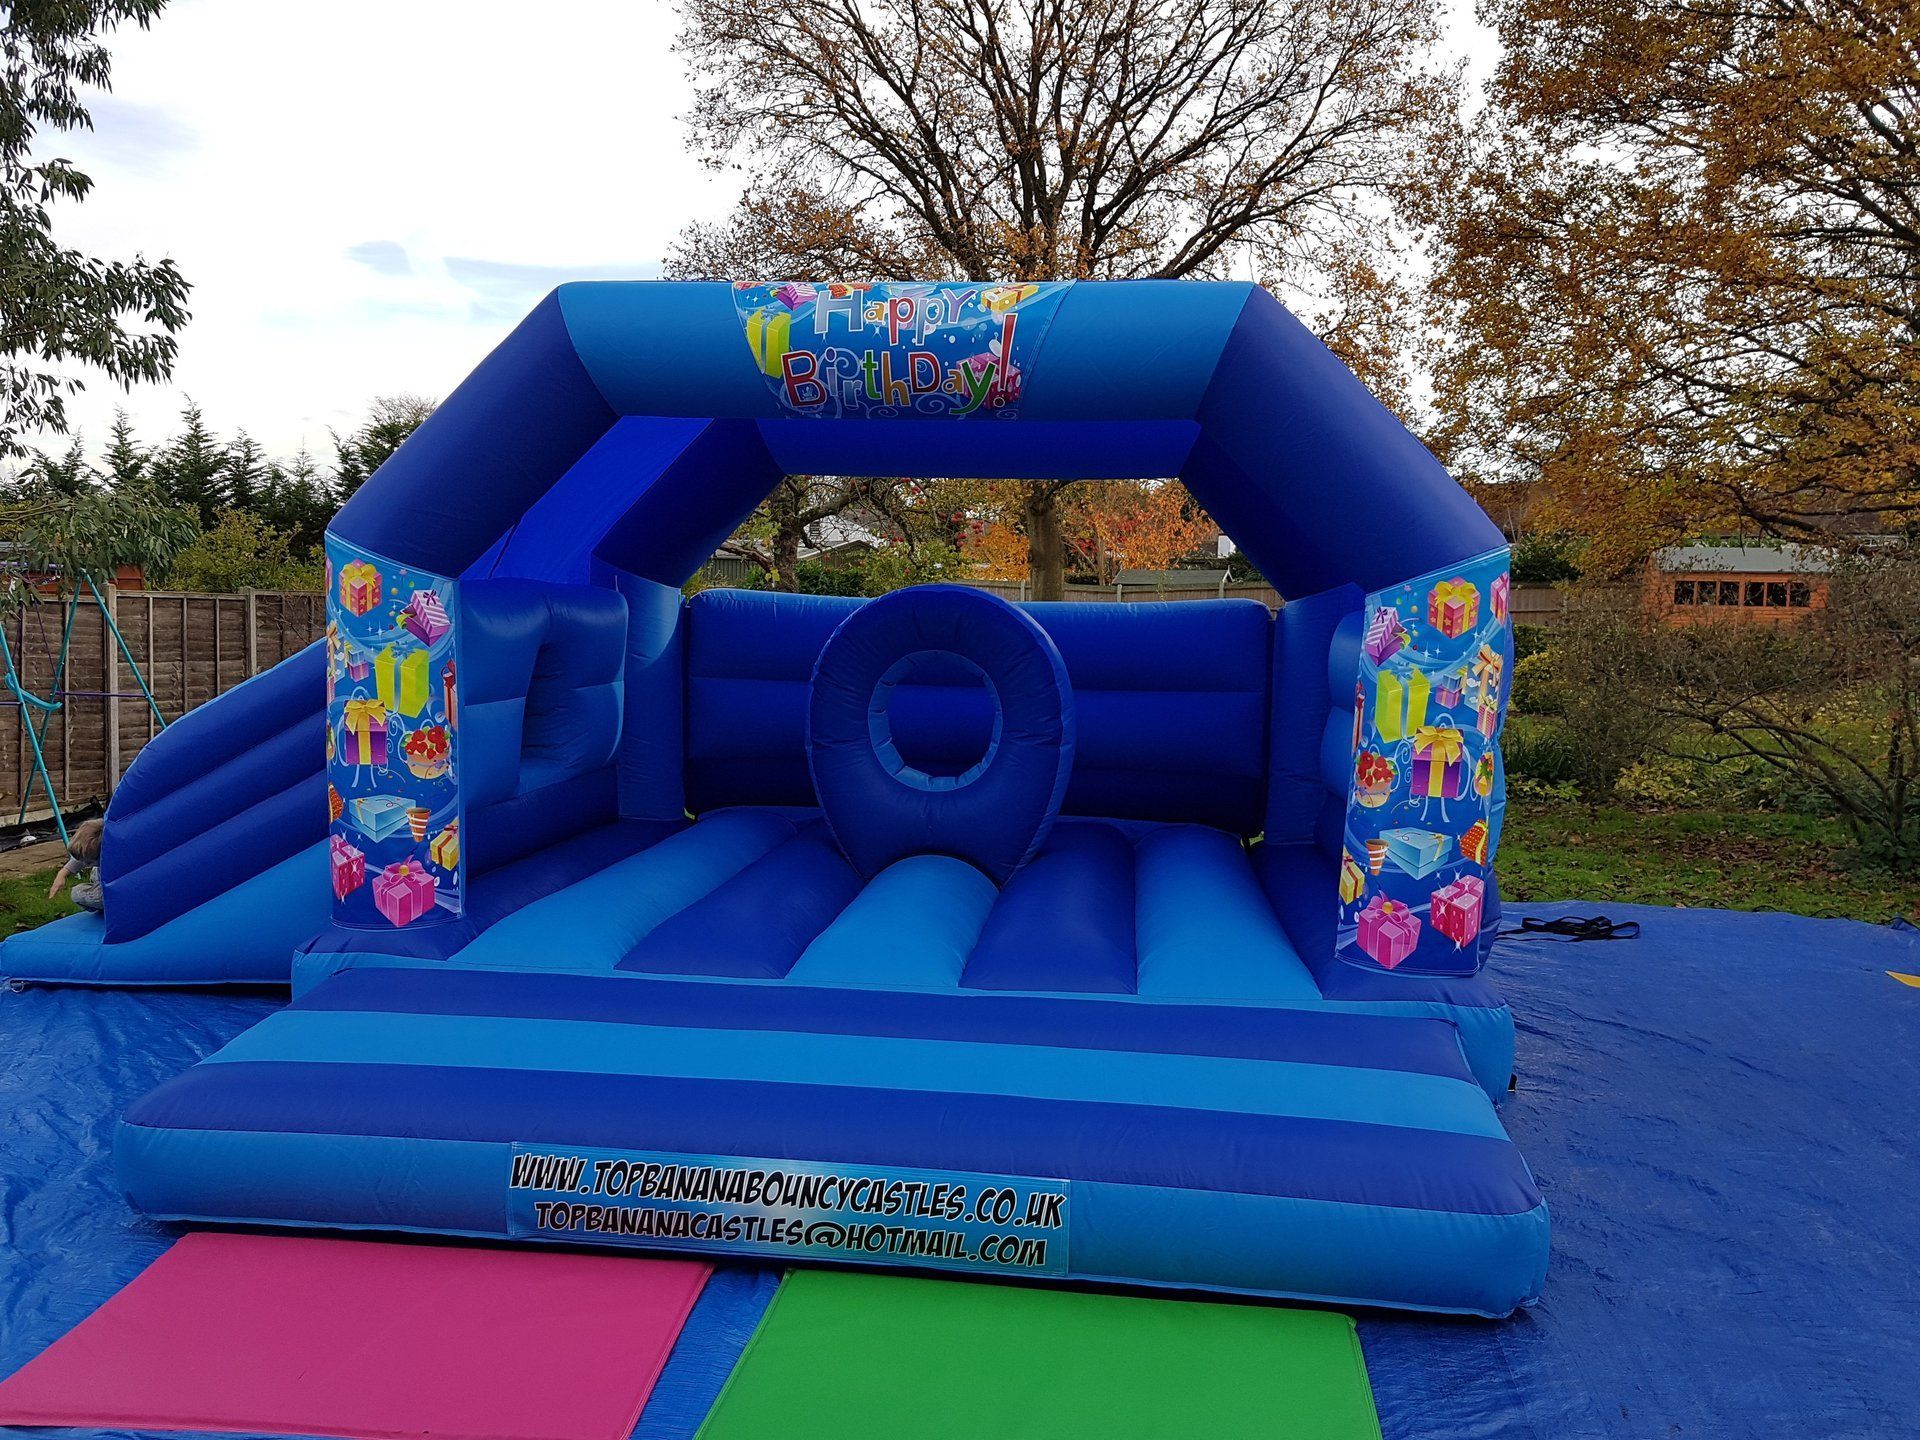 large bouncy castle with birthday artwork